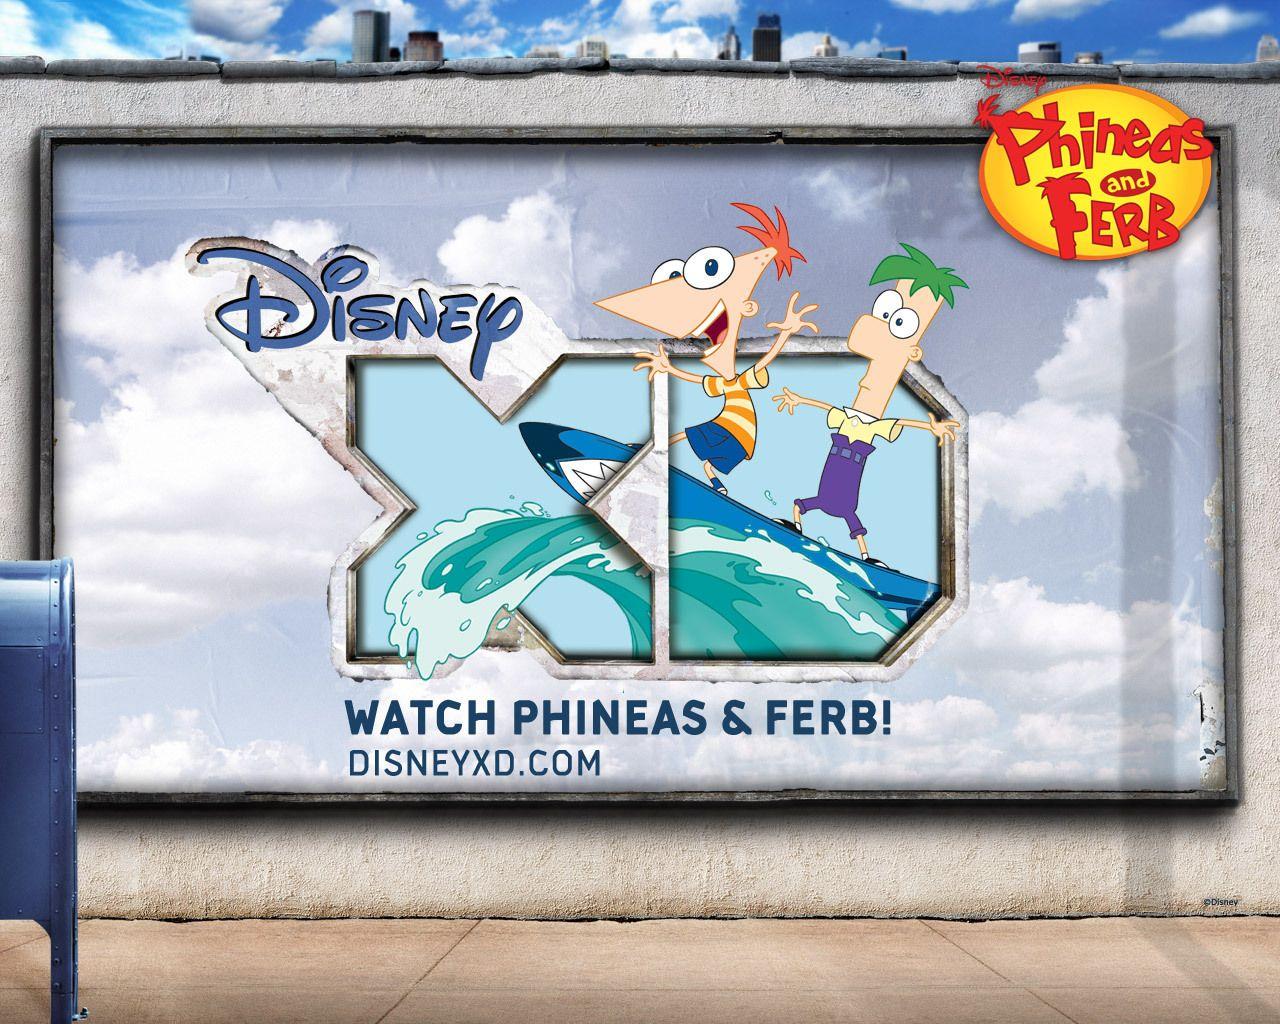 Phineas and Ferb Disney XD 1280x1024